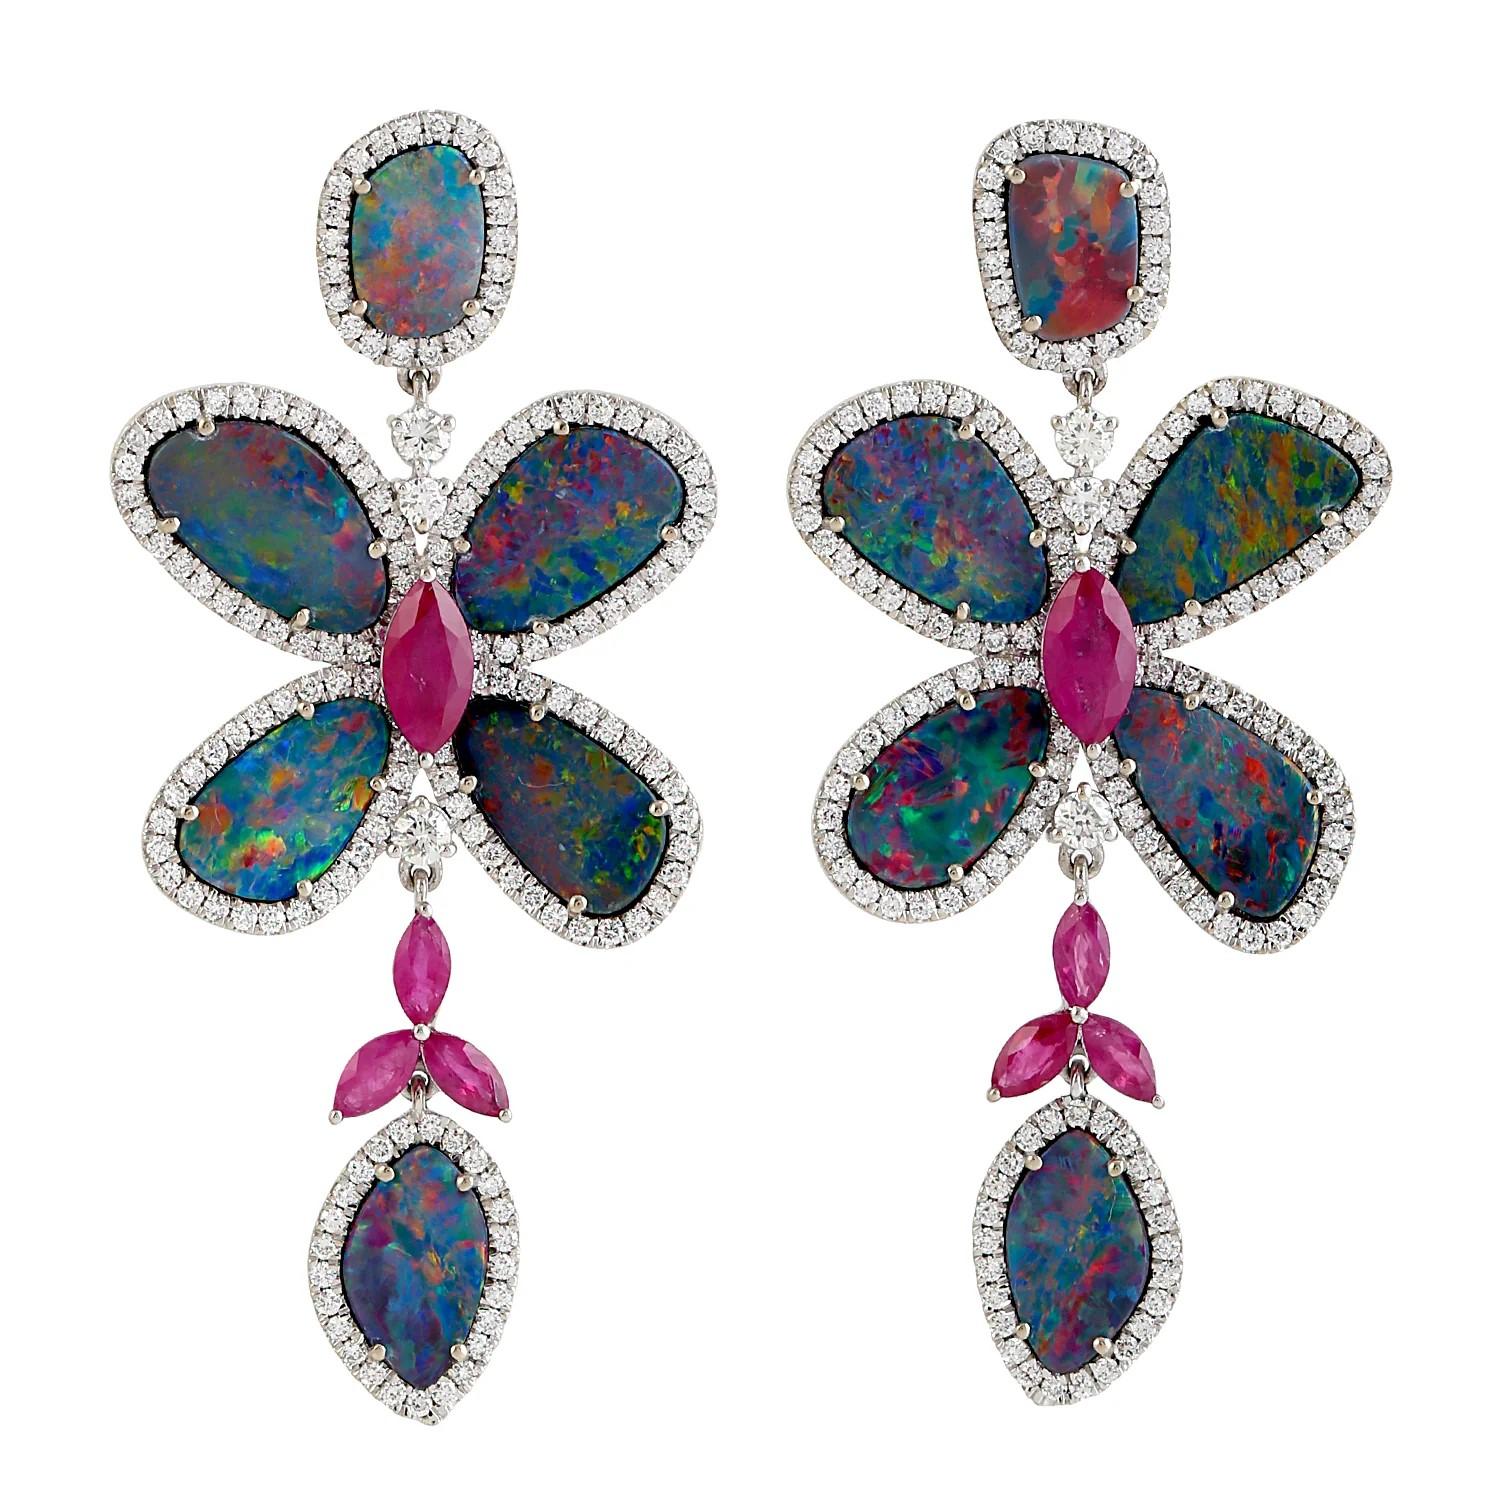 Handcrafted from 18-karat gold, these exquisite drop earrings are set with 10.02 carats Opal, 2.52 carat ruby and 2.32 carats of glimmering diamonds. 

FOLLOW  MEGHNA JEWELS storefront to view the latest collection & exclusive pieces.  Meghna Jewels